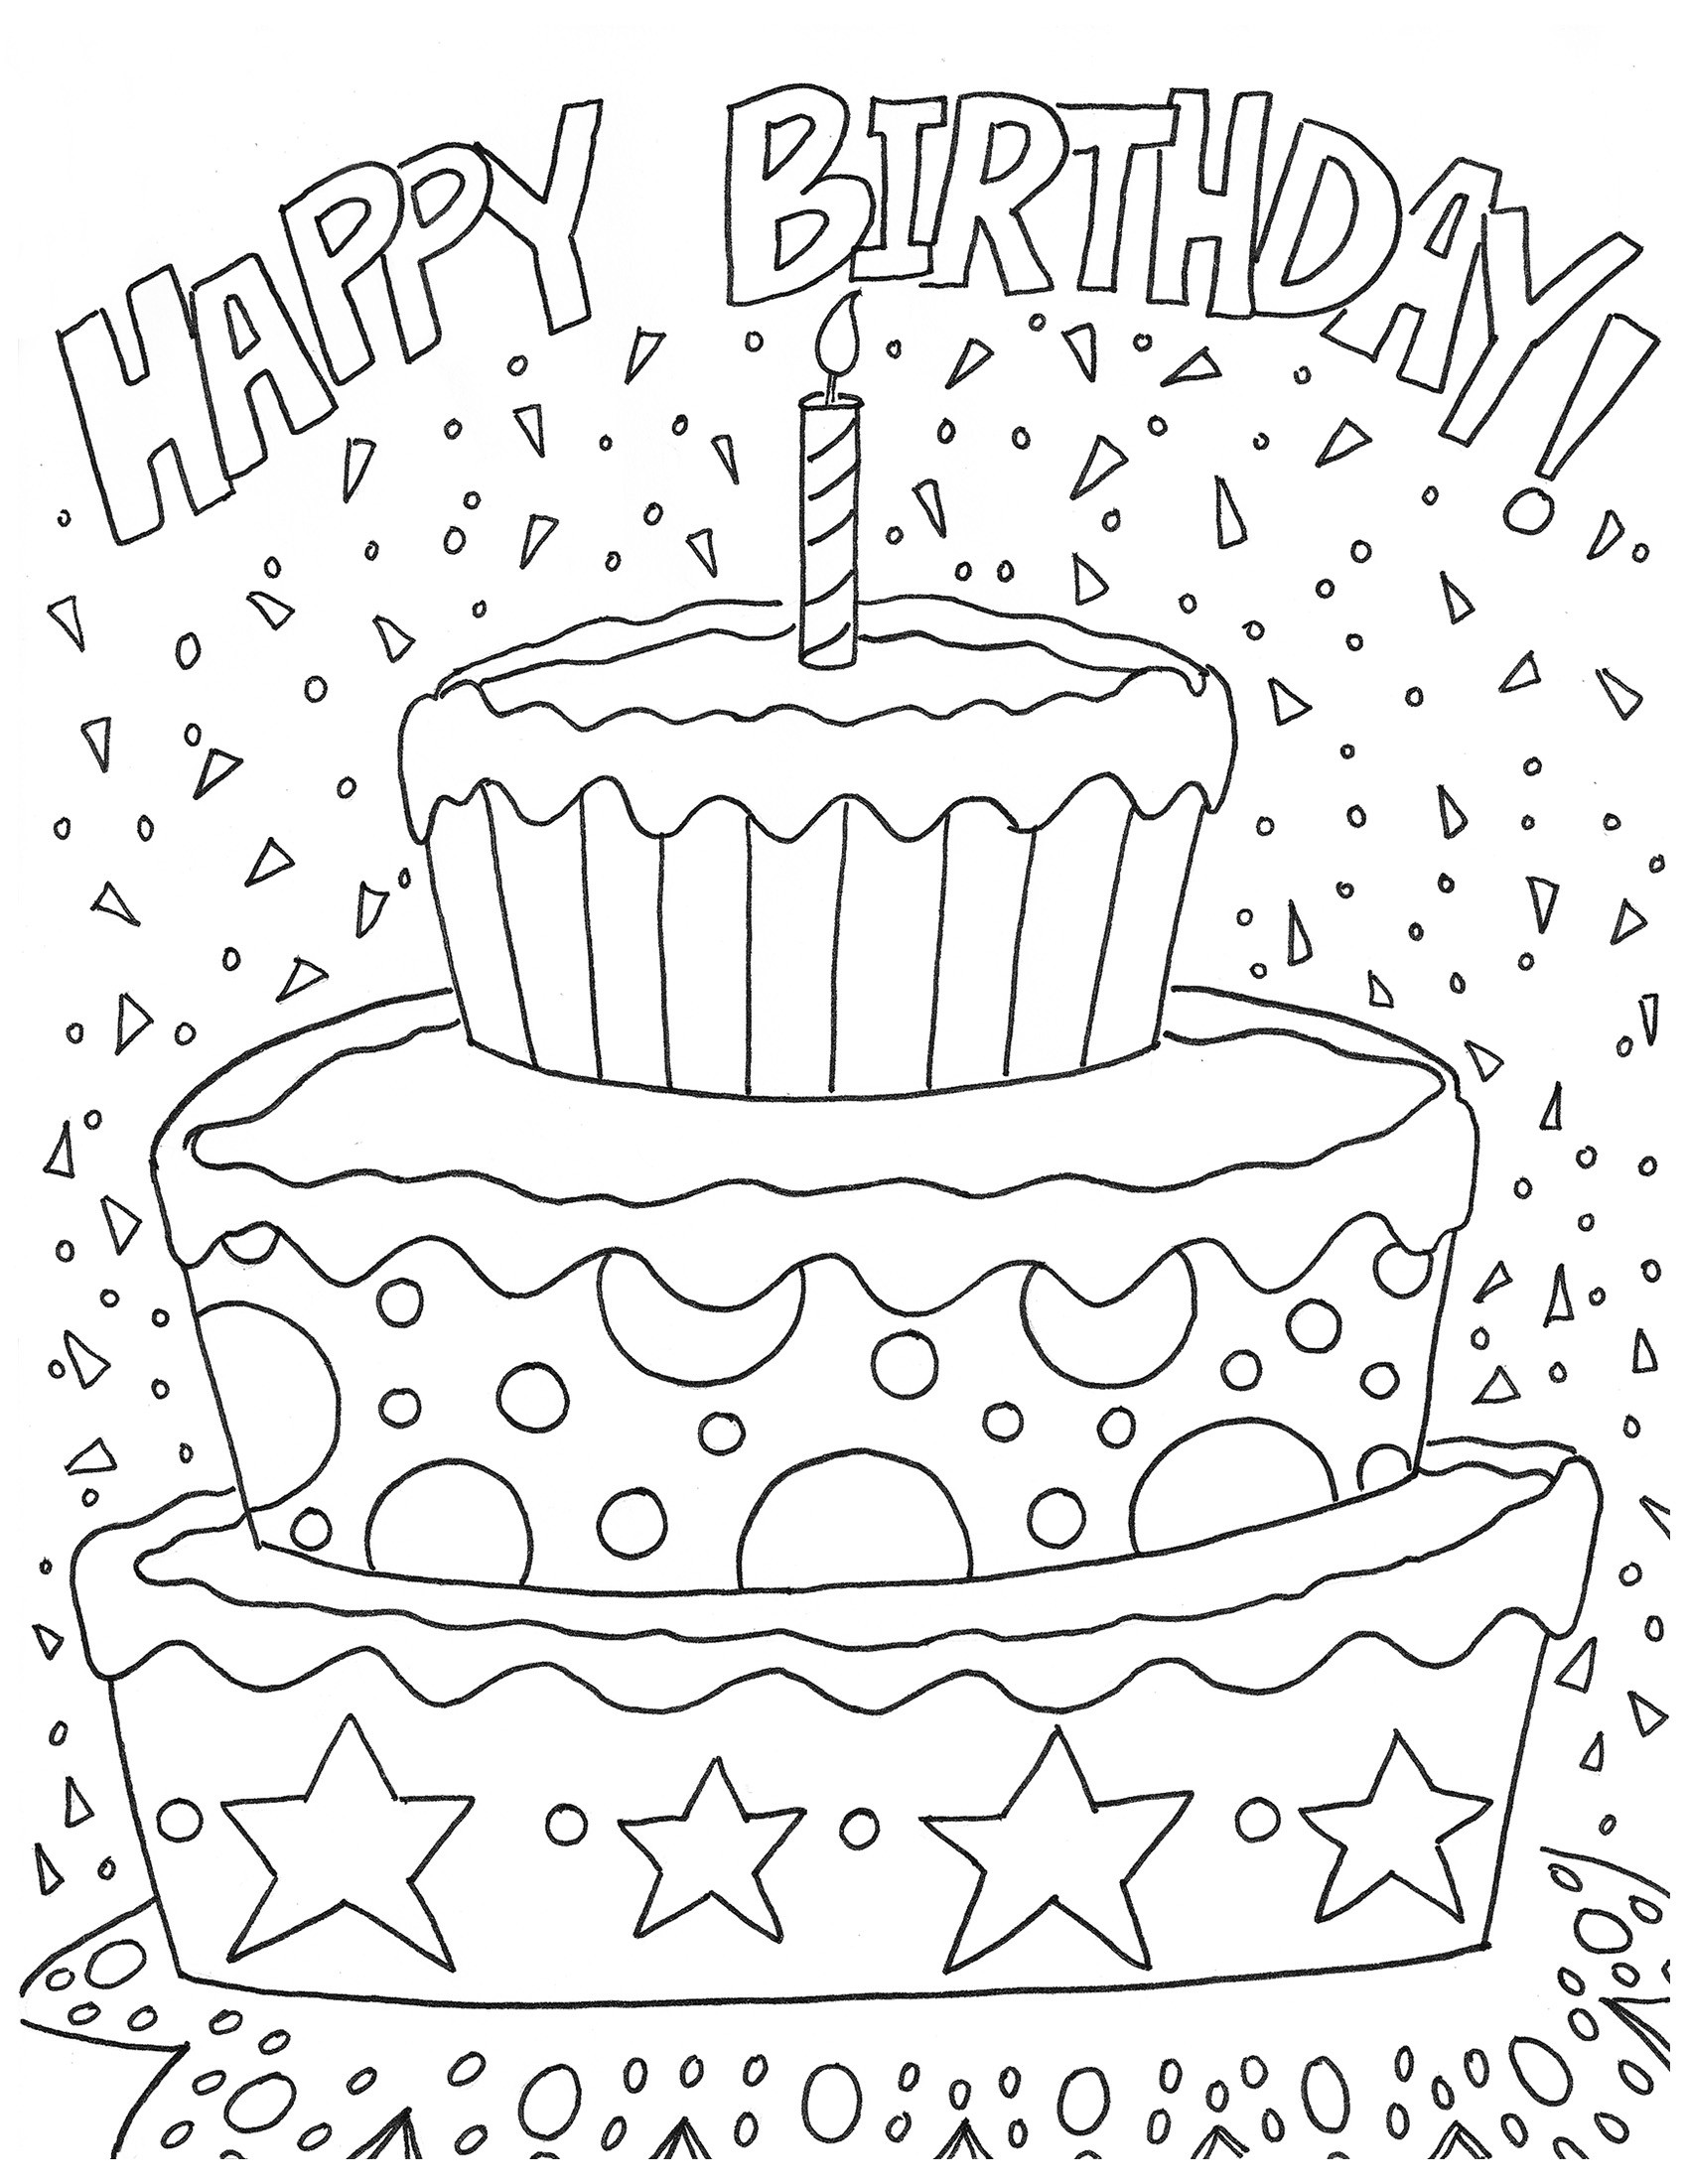 Coloring Birthday Cards
 Free Happy Birthday Coloring Page and Hershey